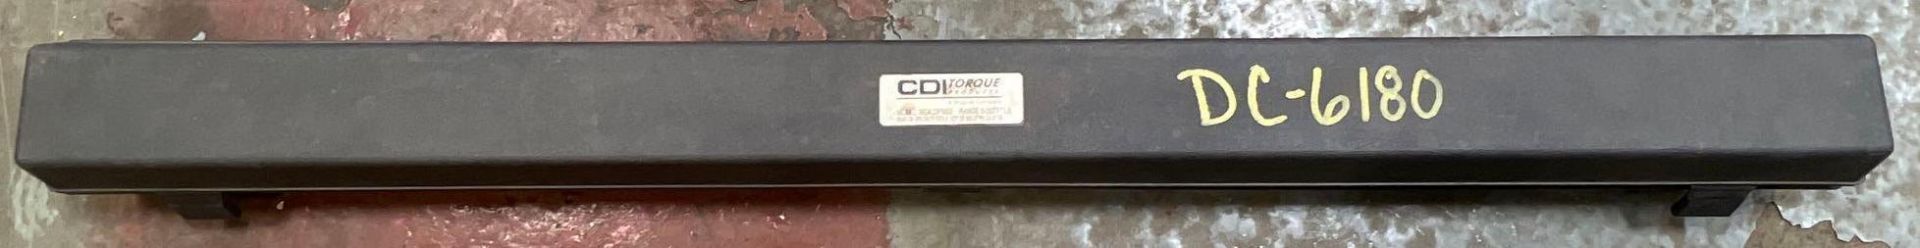 CDI Torque Wrench Model: 3504LDFNSS - Image 6 of 8